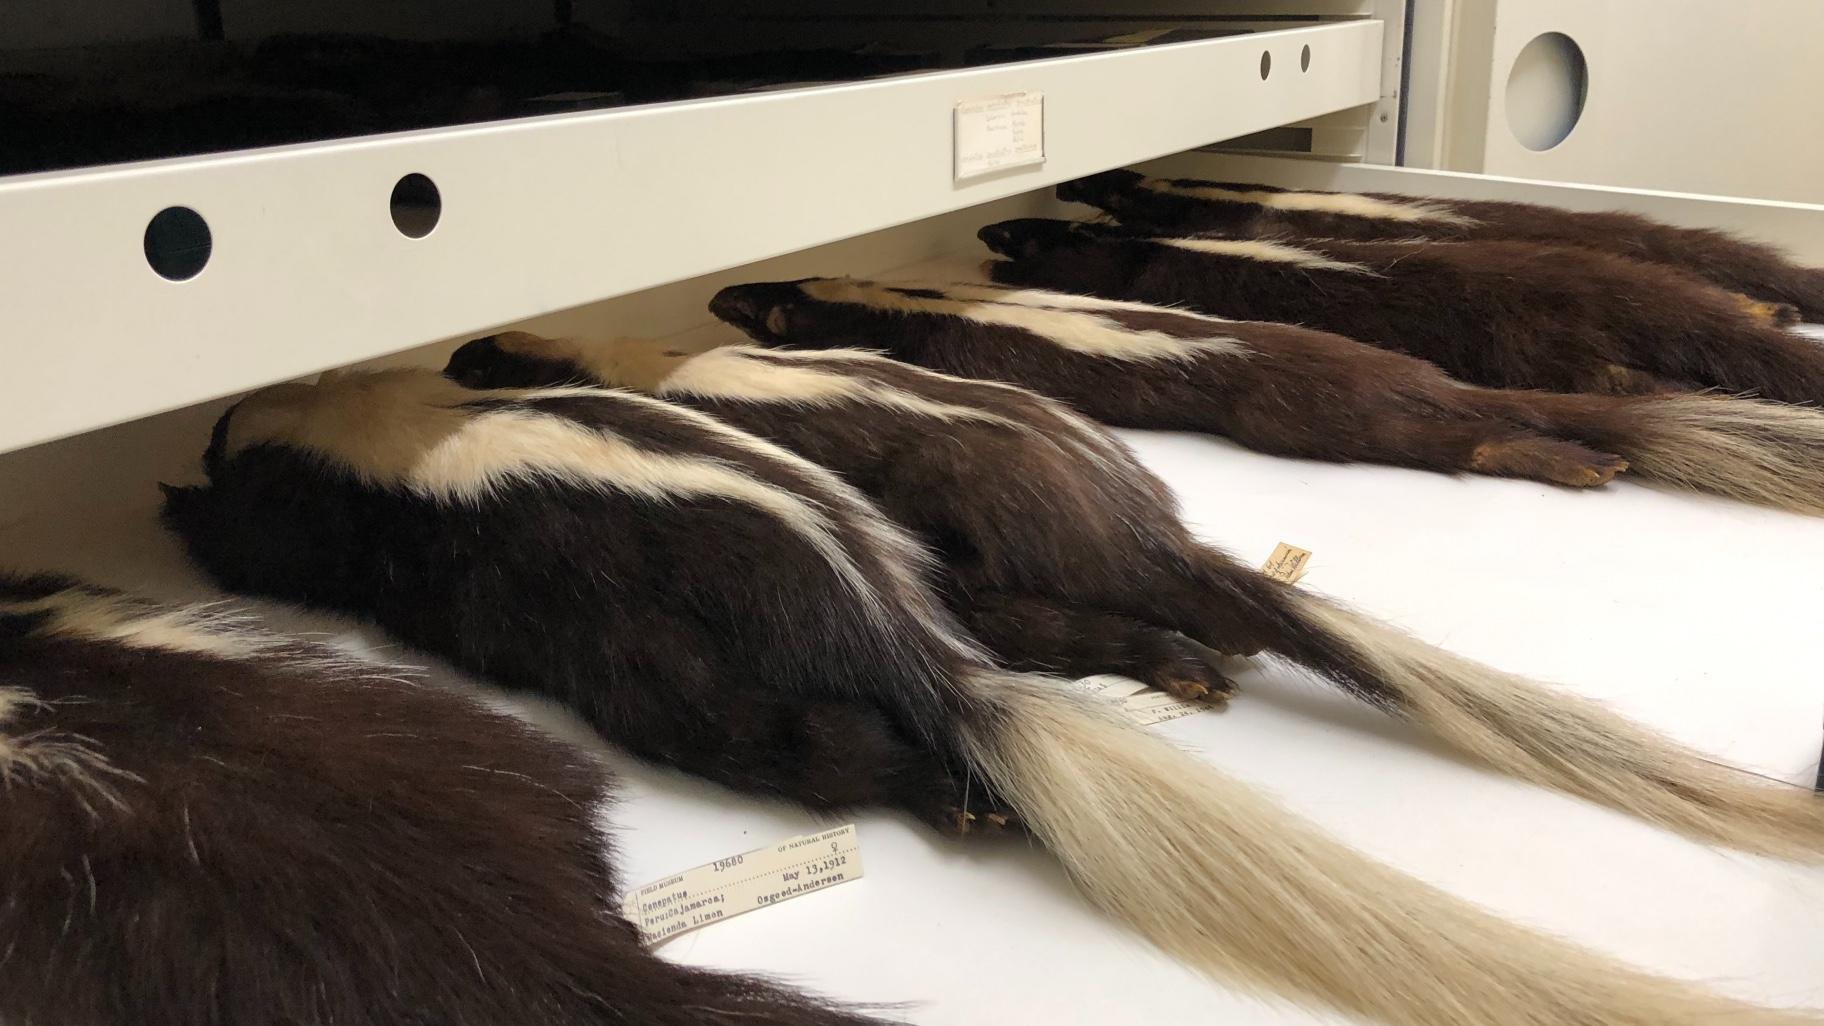 Skunks powerful scent spray is an excellent defense, but they have occasionally been hunted for their fur. Black strips have been used as fur trim, sometimes sold as "sable," Ferguson said. (Patty Wetli / WTTW News)